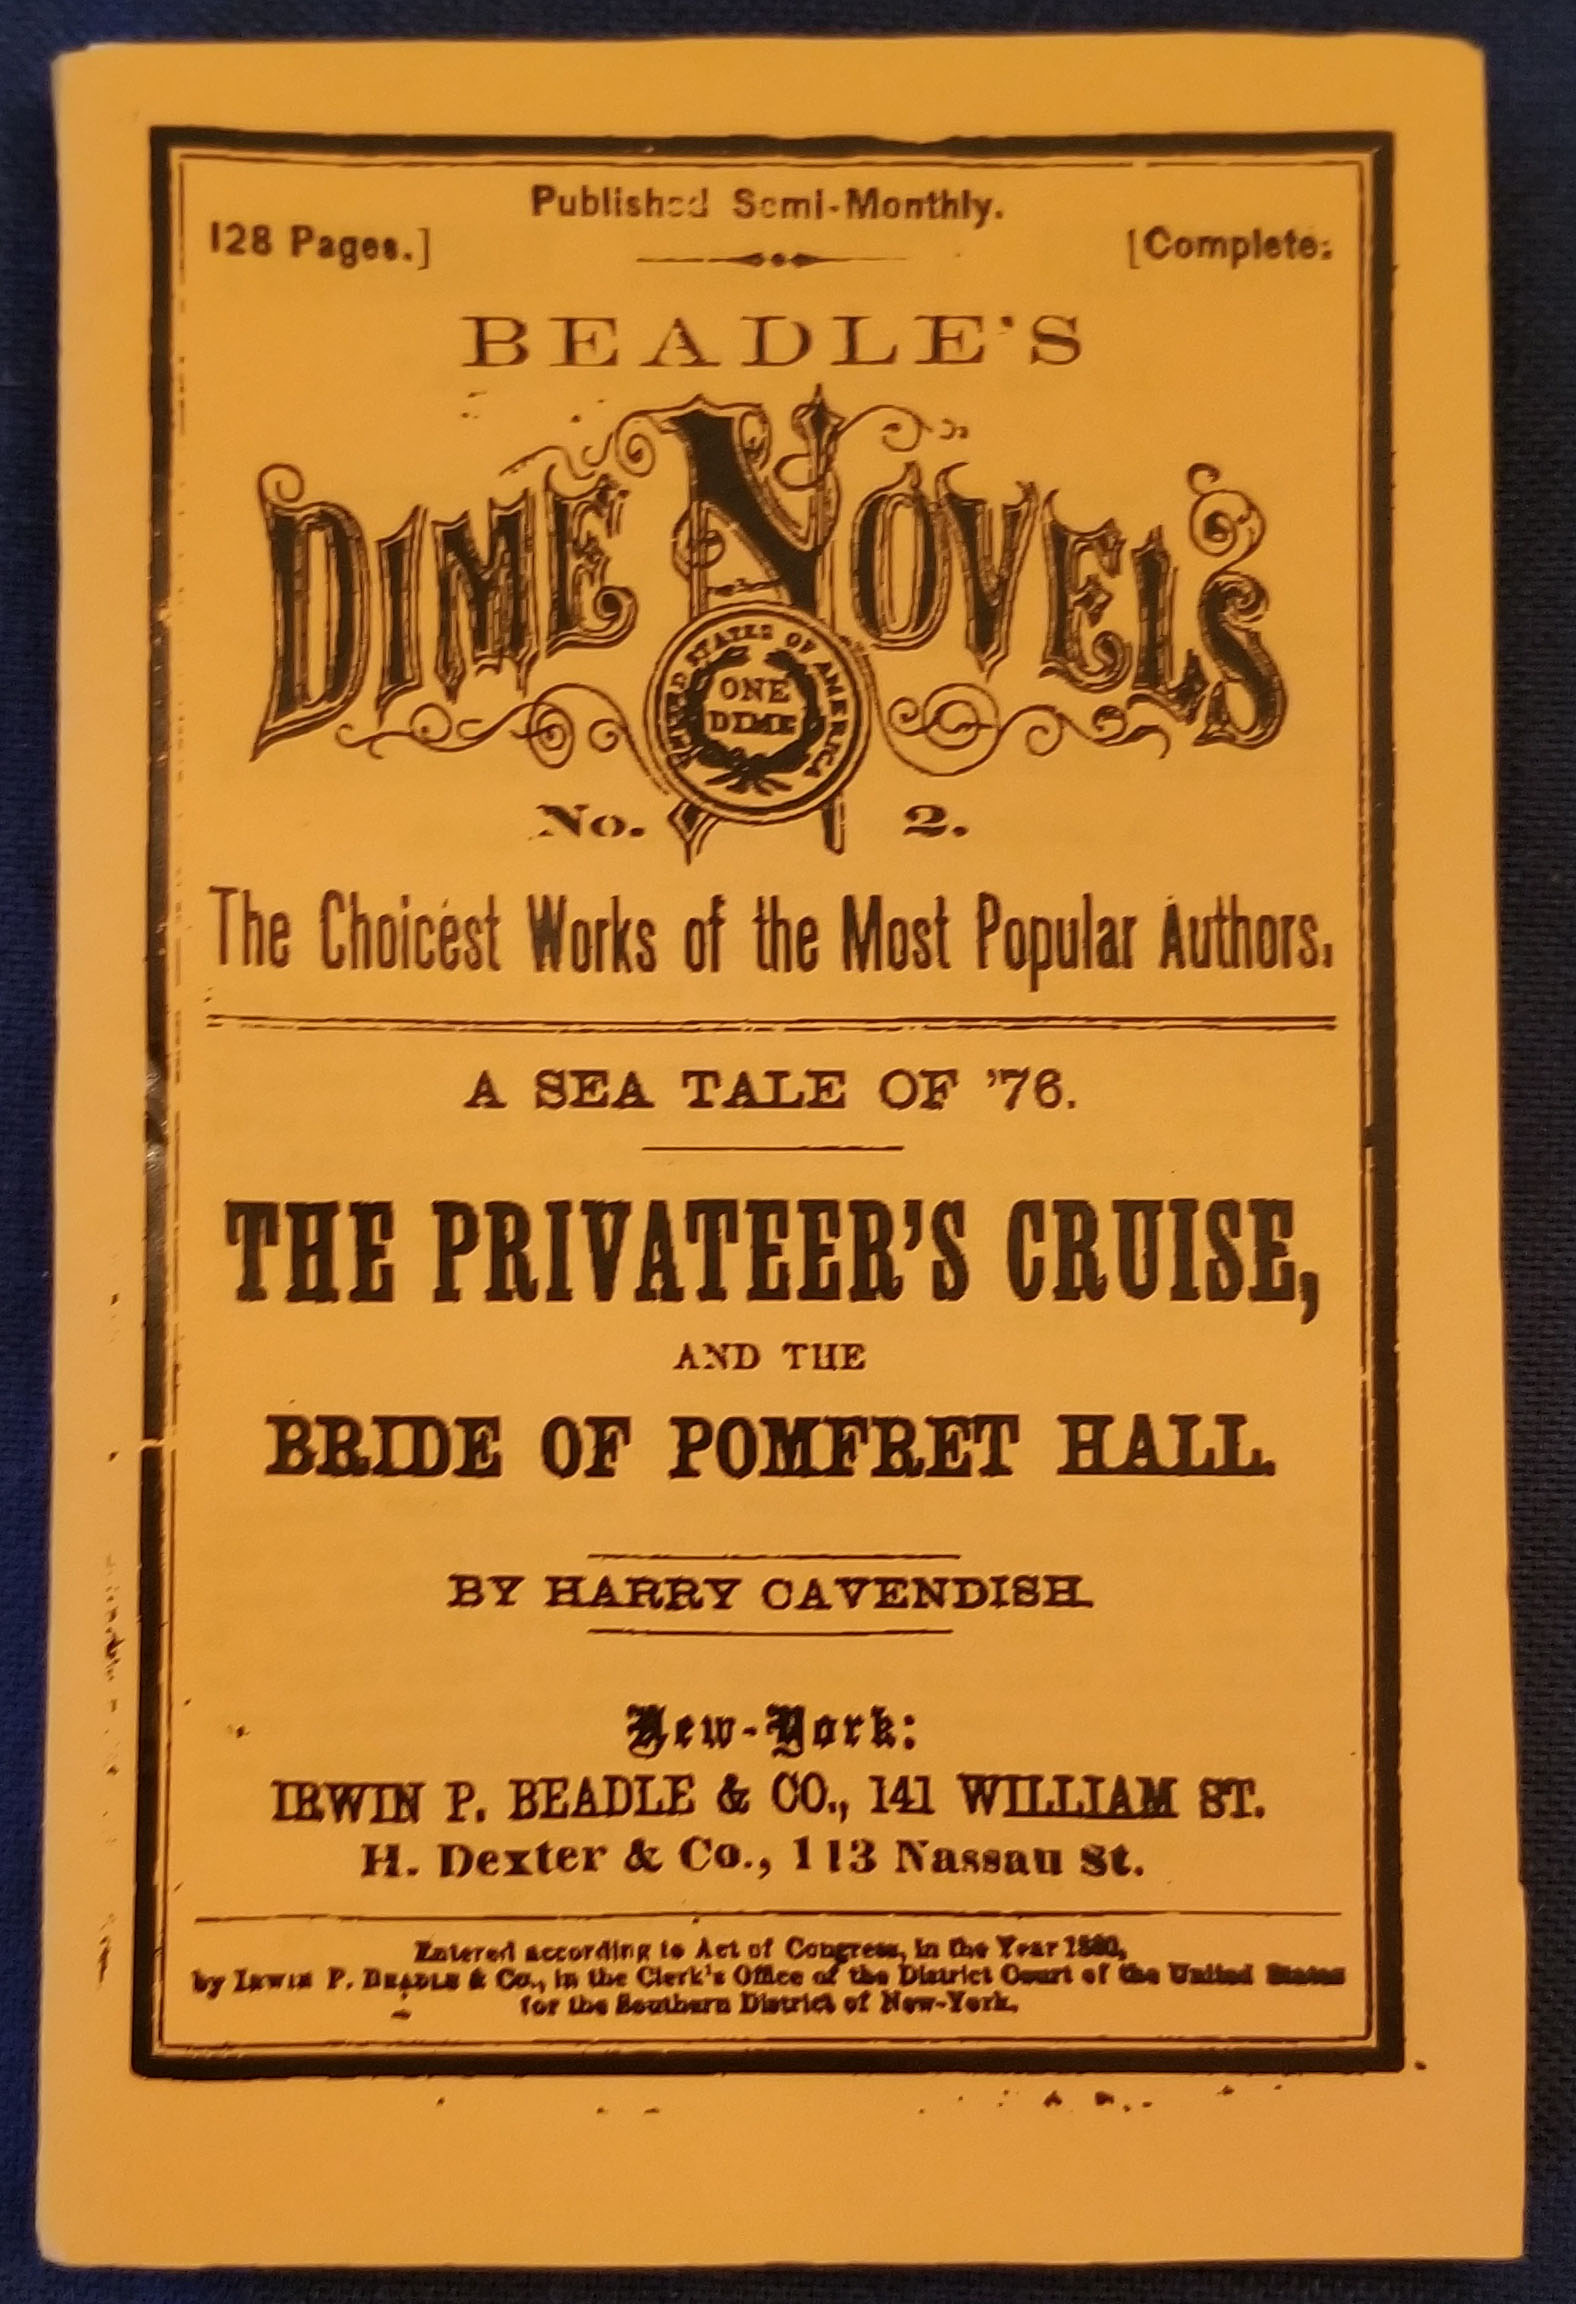 Dime Novel - The Privateer's Cruise